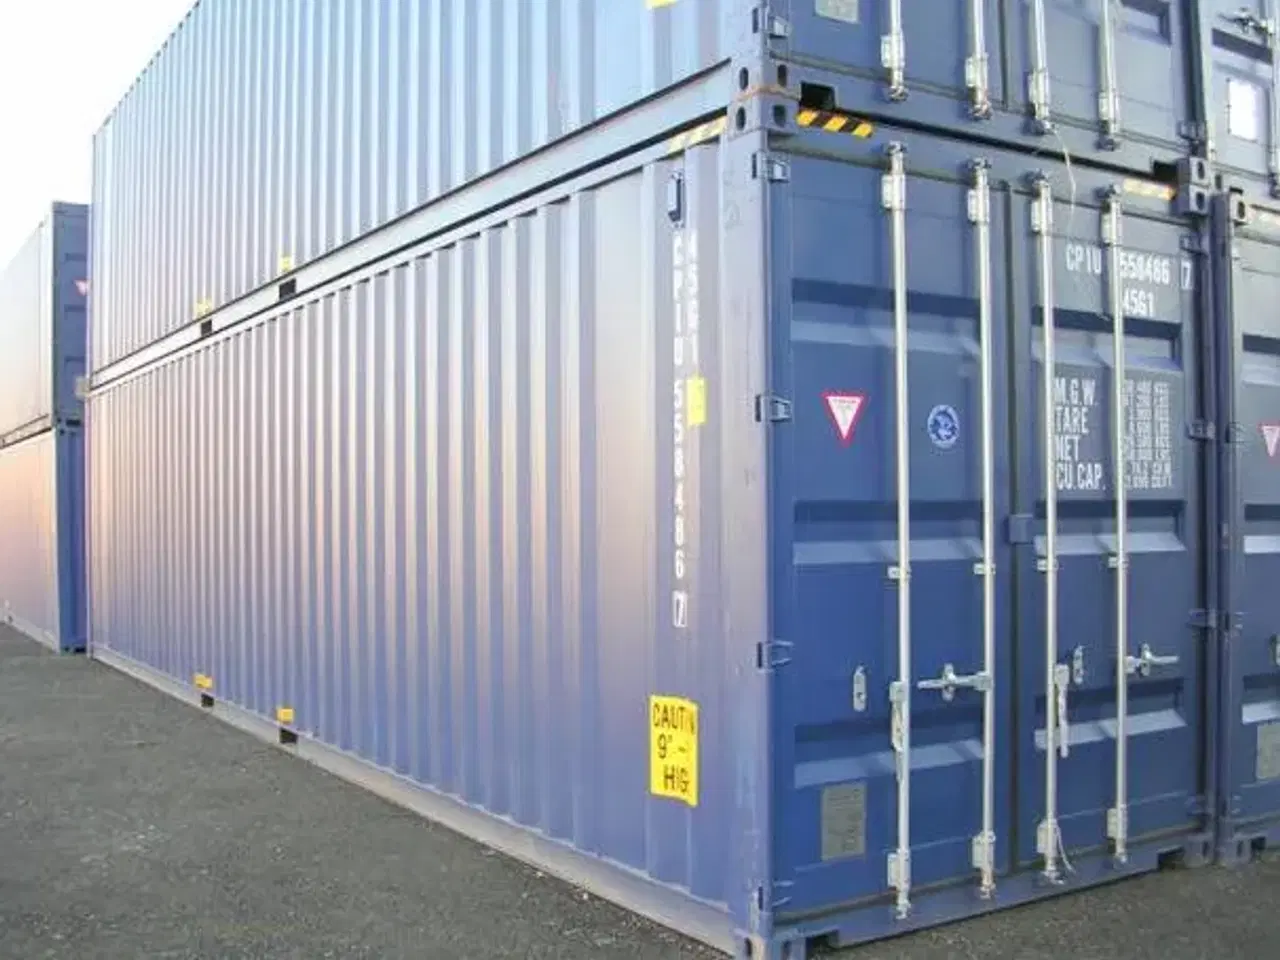 Billede 4 - Container - Container 20/40 fod - Ny/Brugt